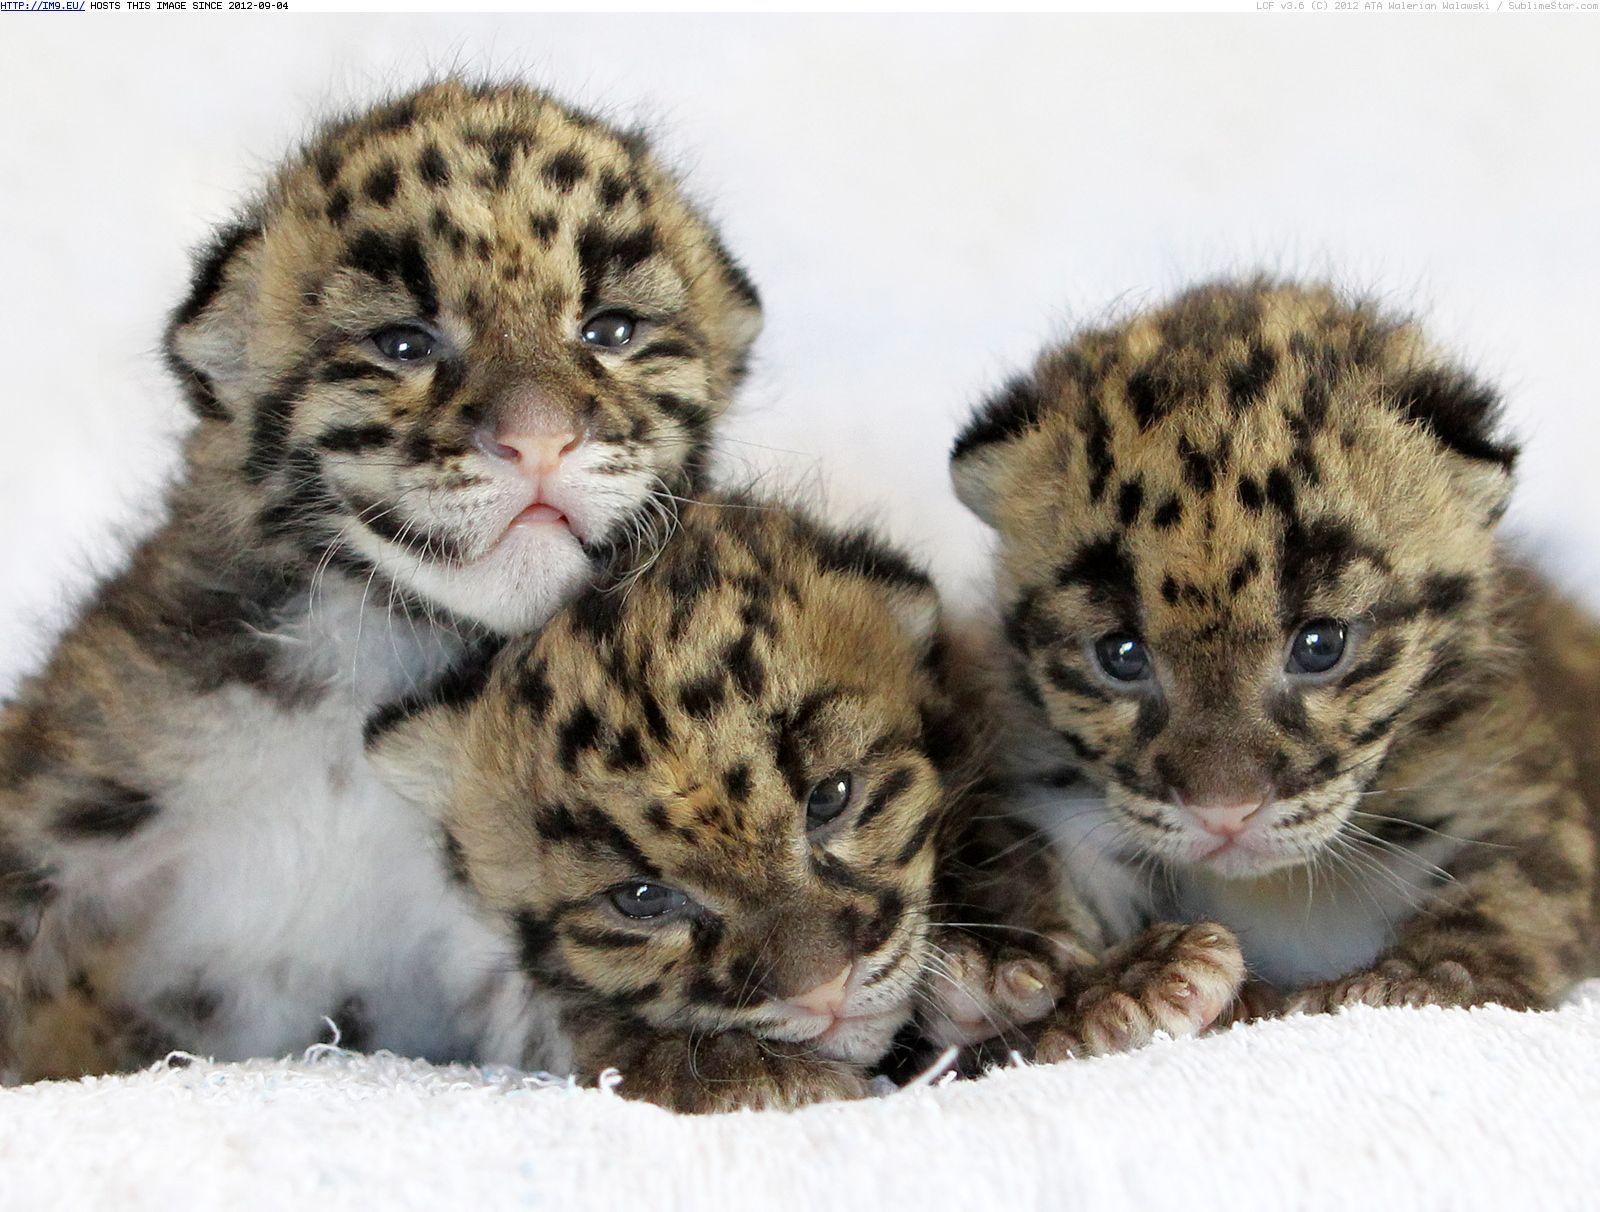 Snow leopard cubs wallpaper baby wallpaper for free downloadD